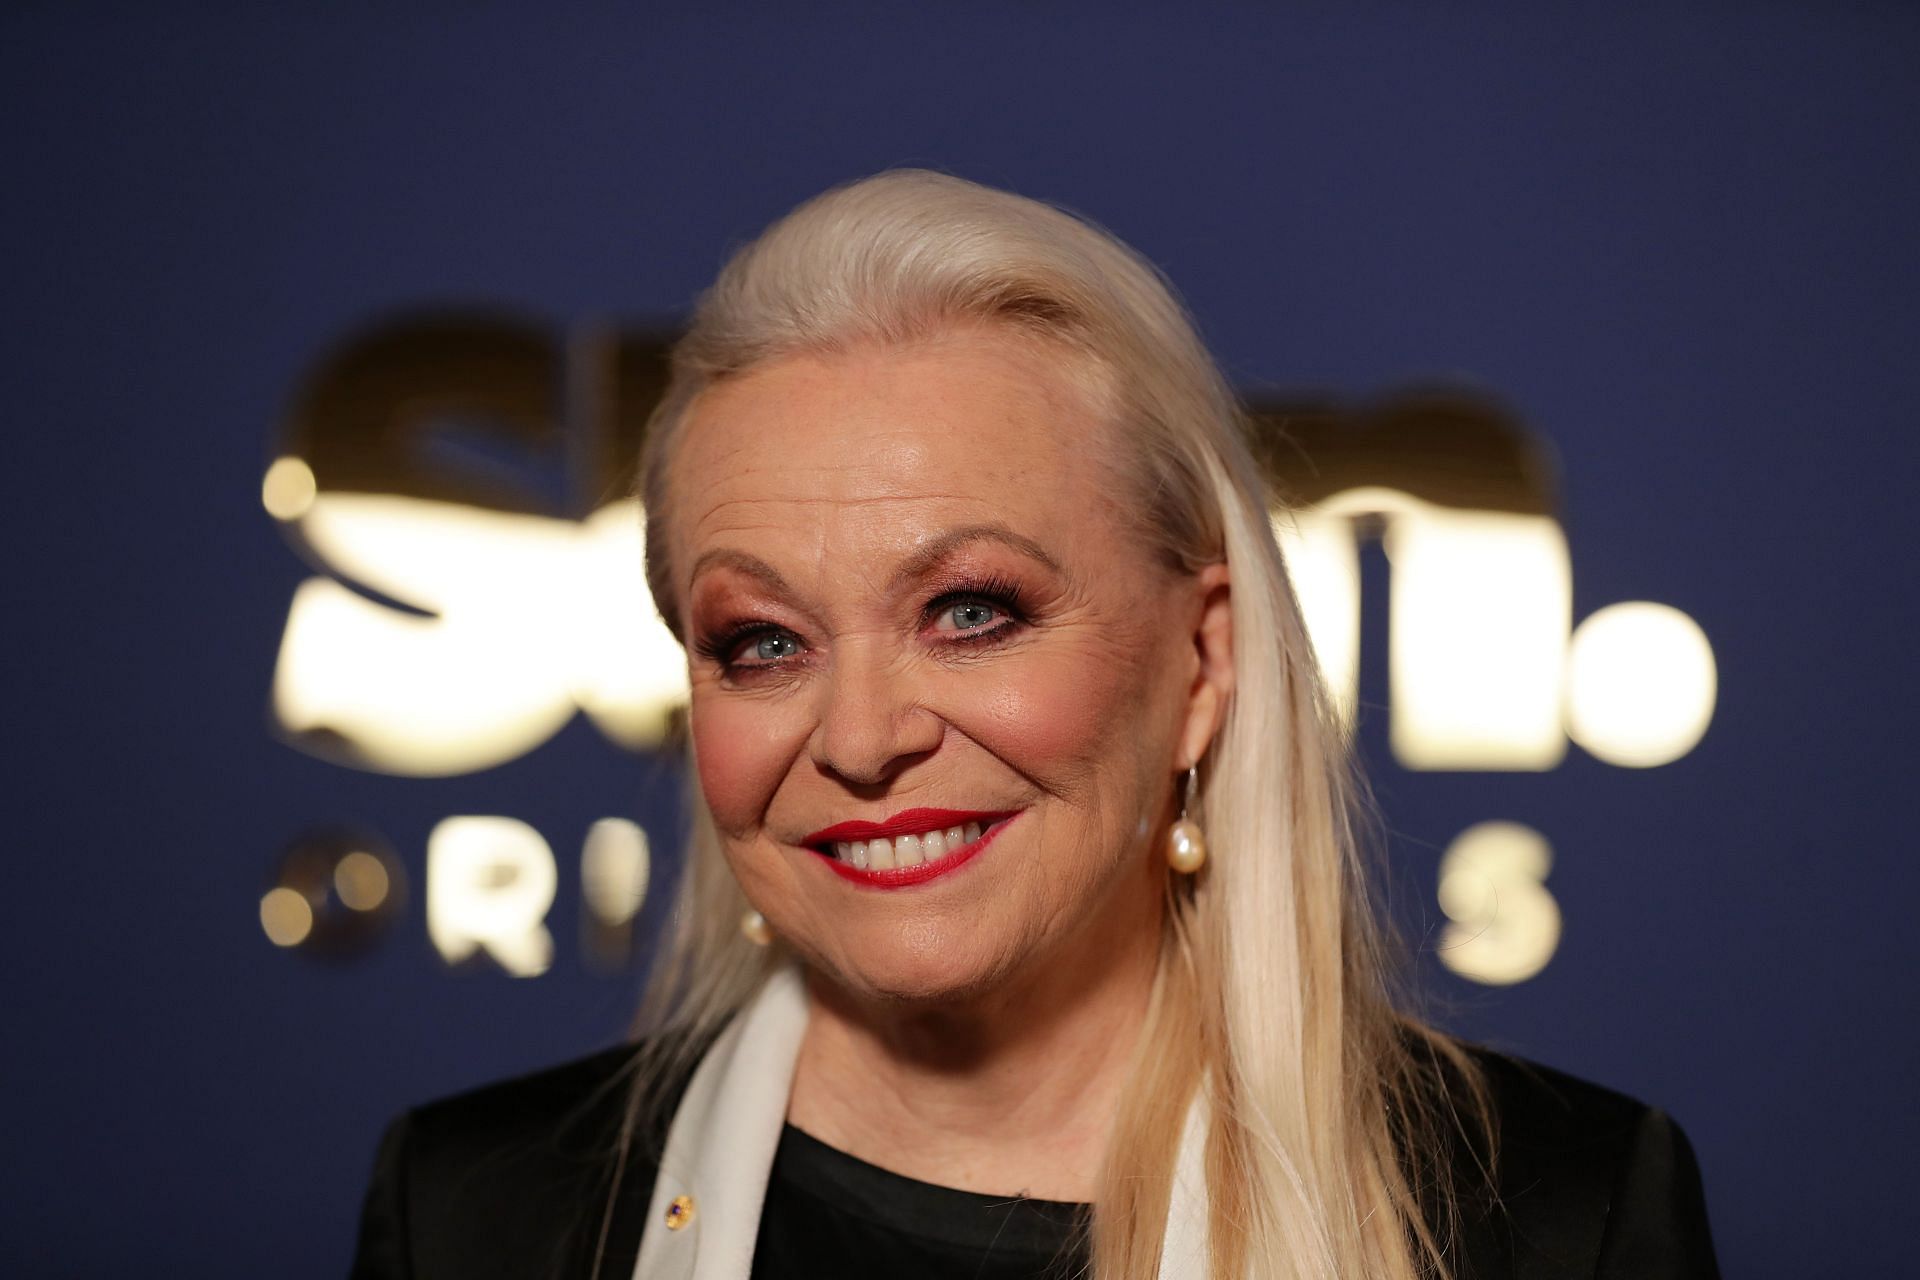 Jacki Weaver plays Shelly Sterling (Image via Mark Metcalfe/Getty Images)